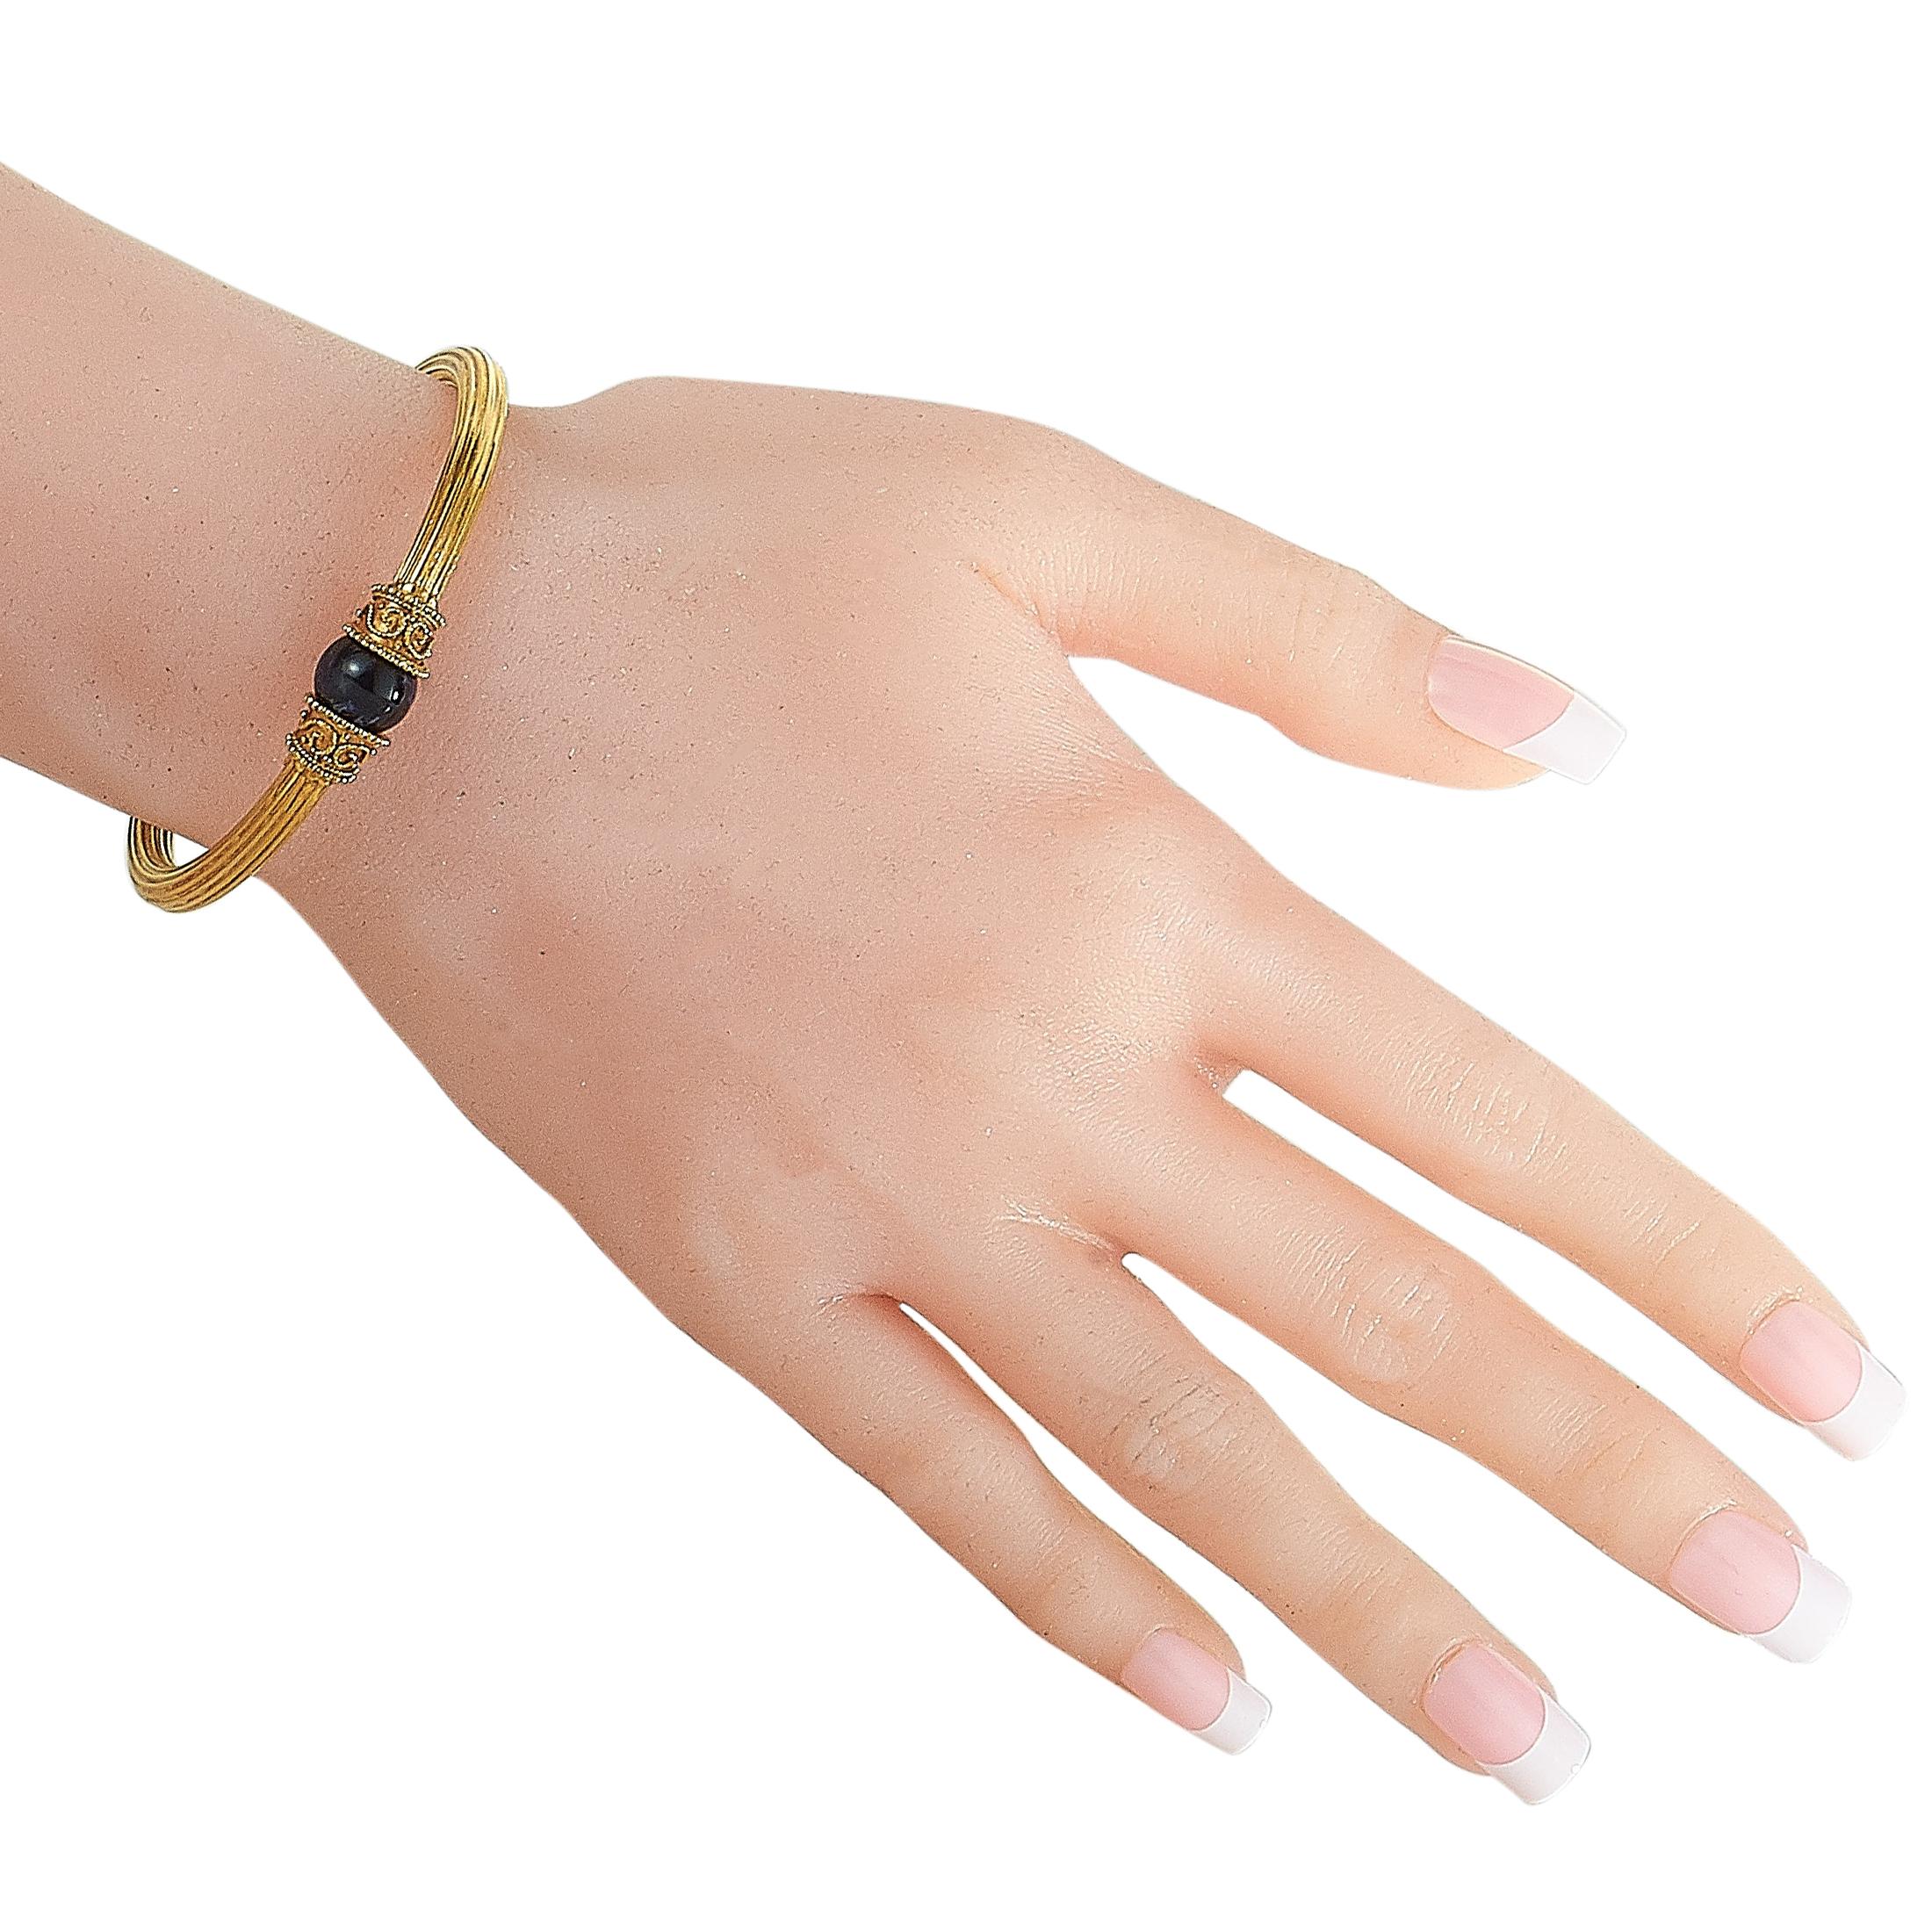 This Ilias Lalaounis bracelet is made out of 18K yellow gold and lapis lazuli and weighs 20.2 grams, measuring 7” in length.
 
 The bracelet is offered in estate condition and includes a gift box.